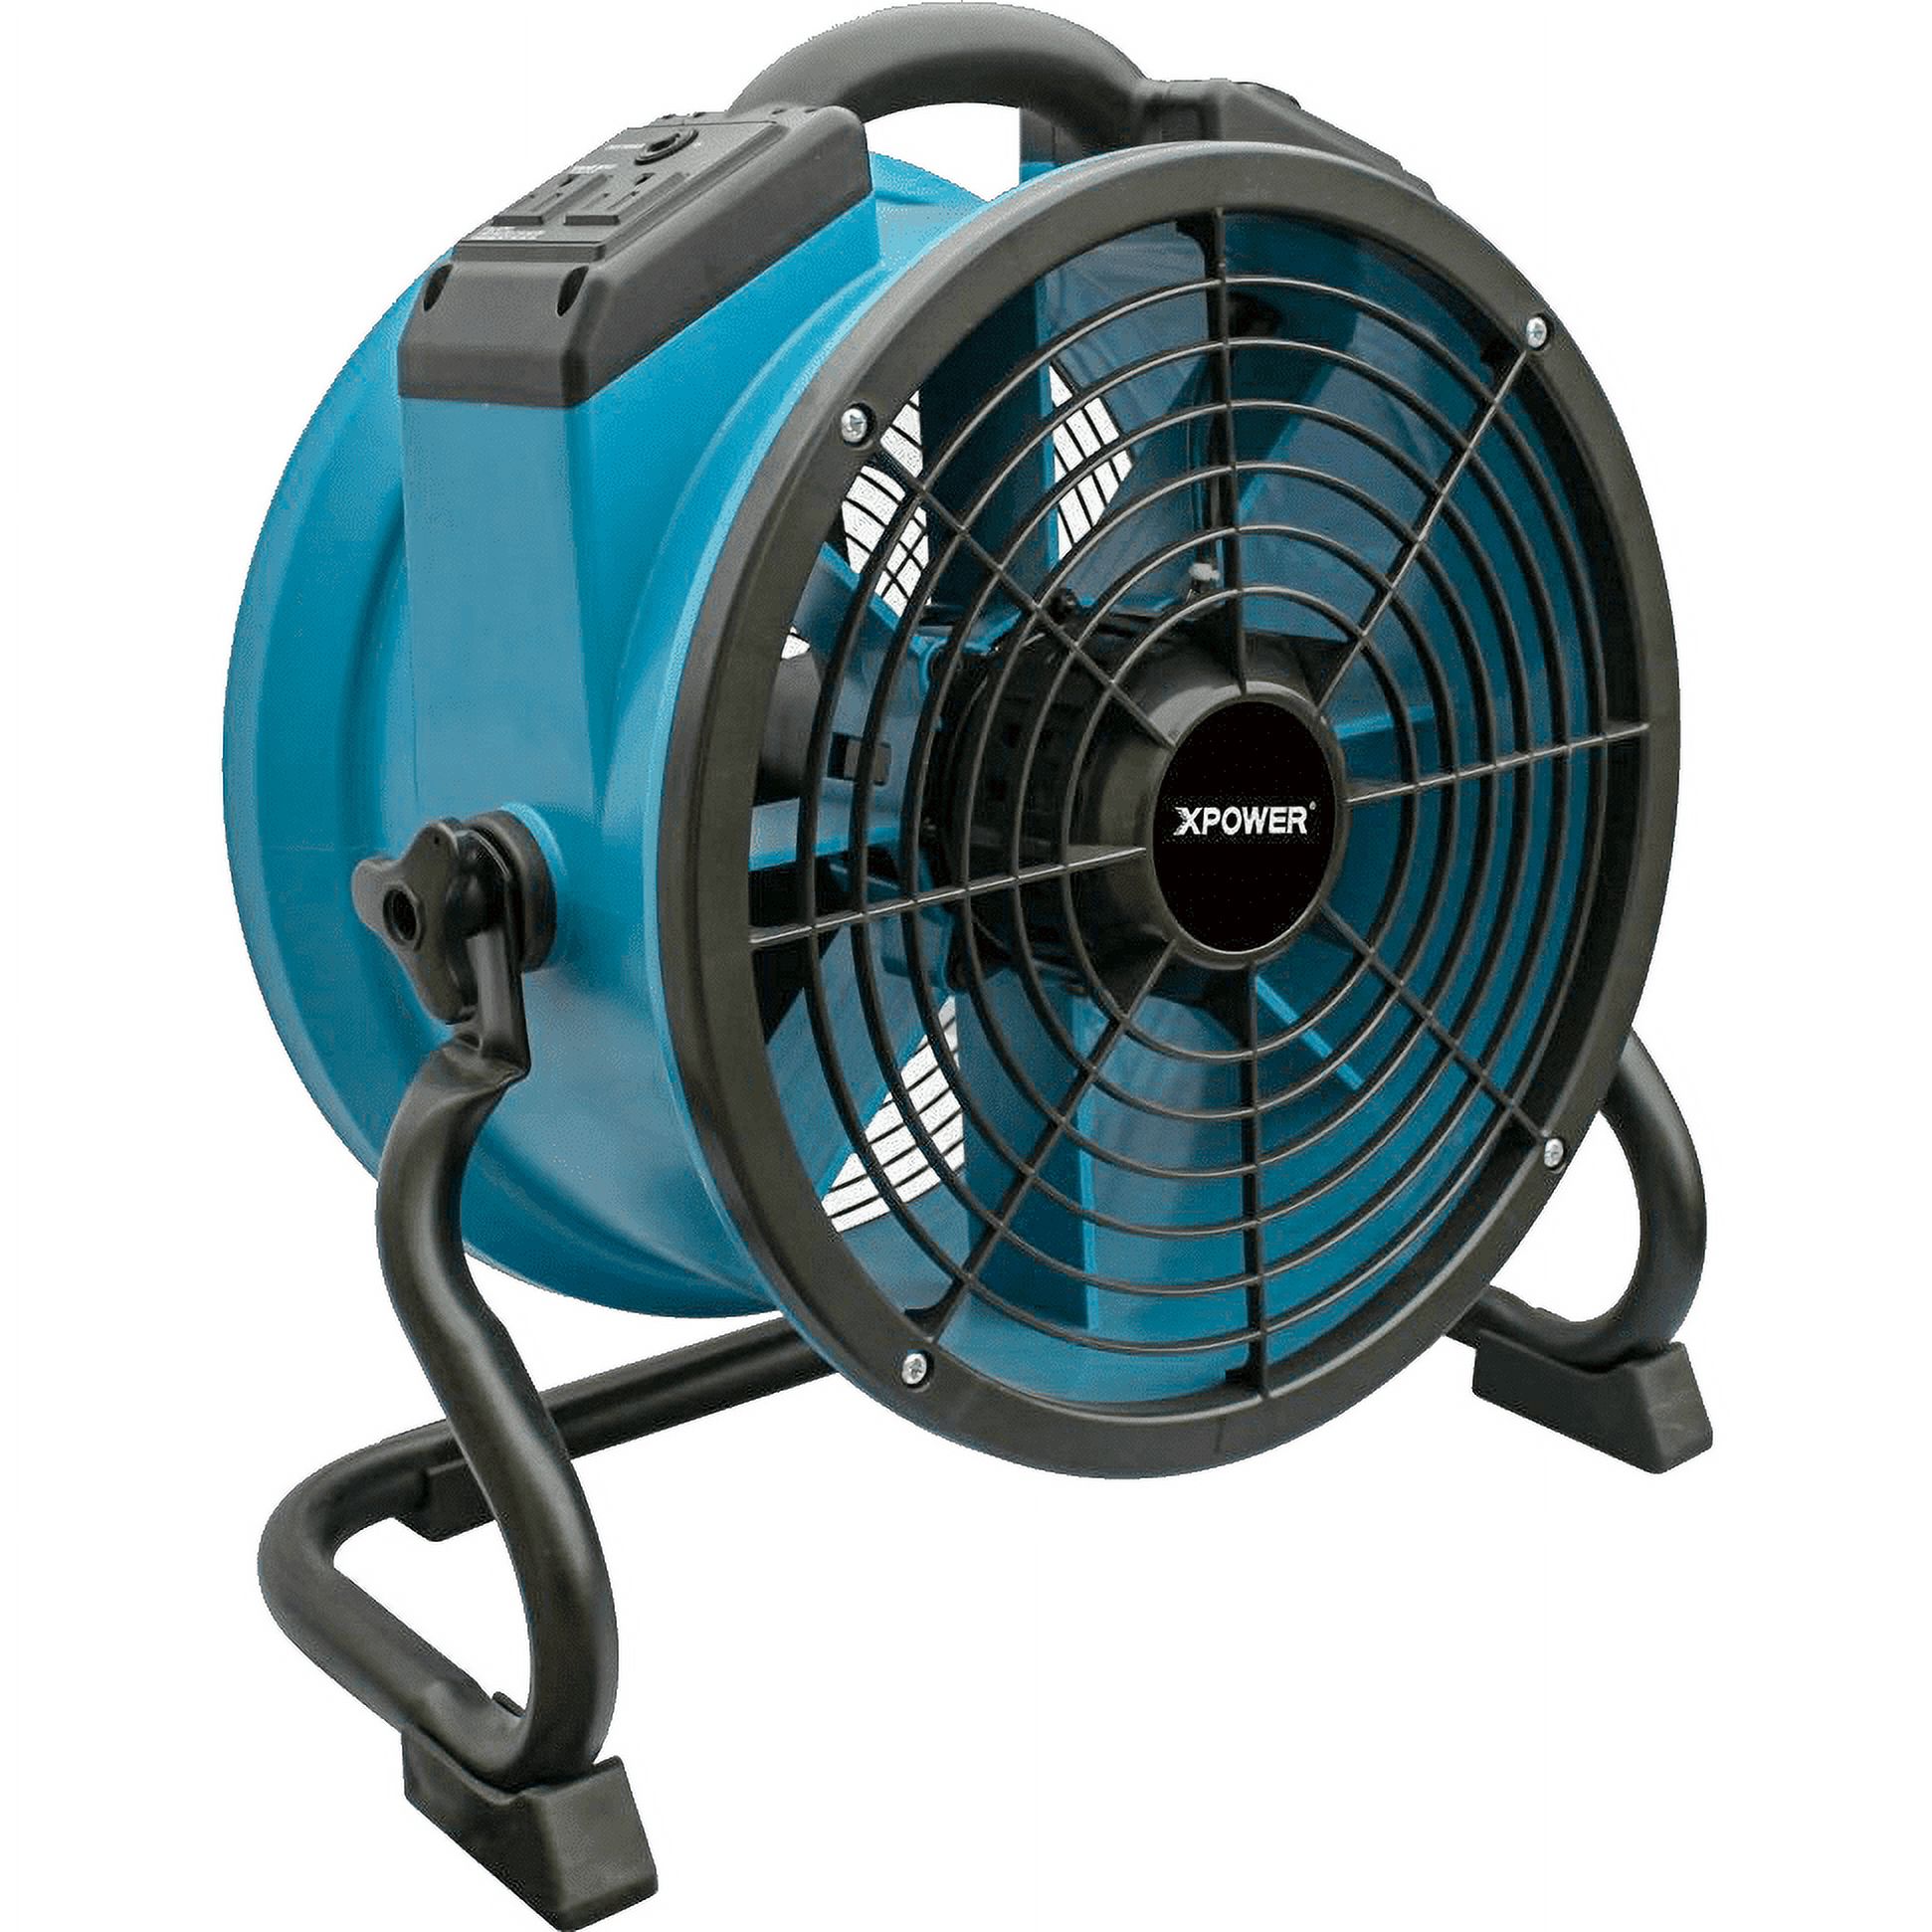 XPOWER 1,720 CFM Professional Axial Fan (X-34AR) - image 1 of 1